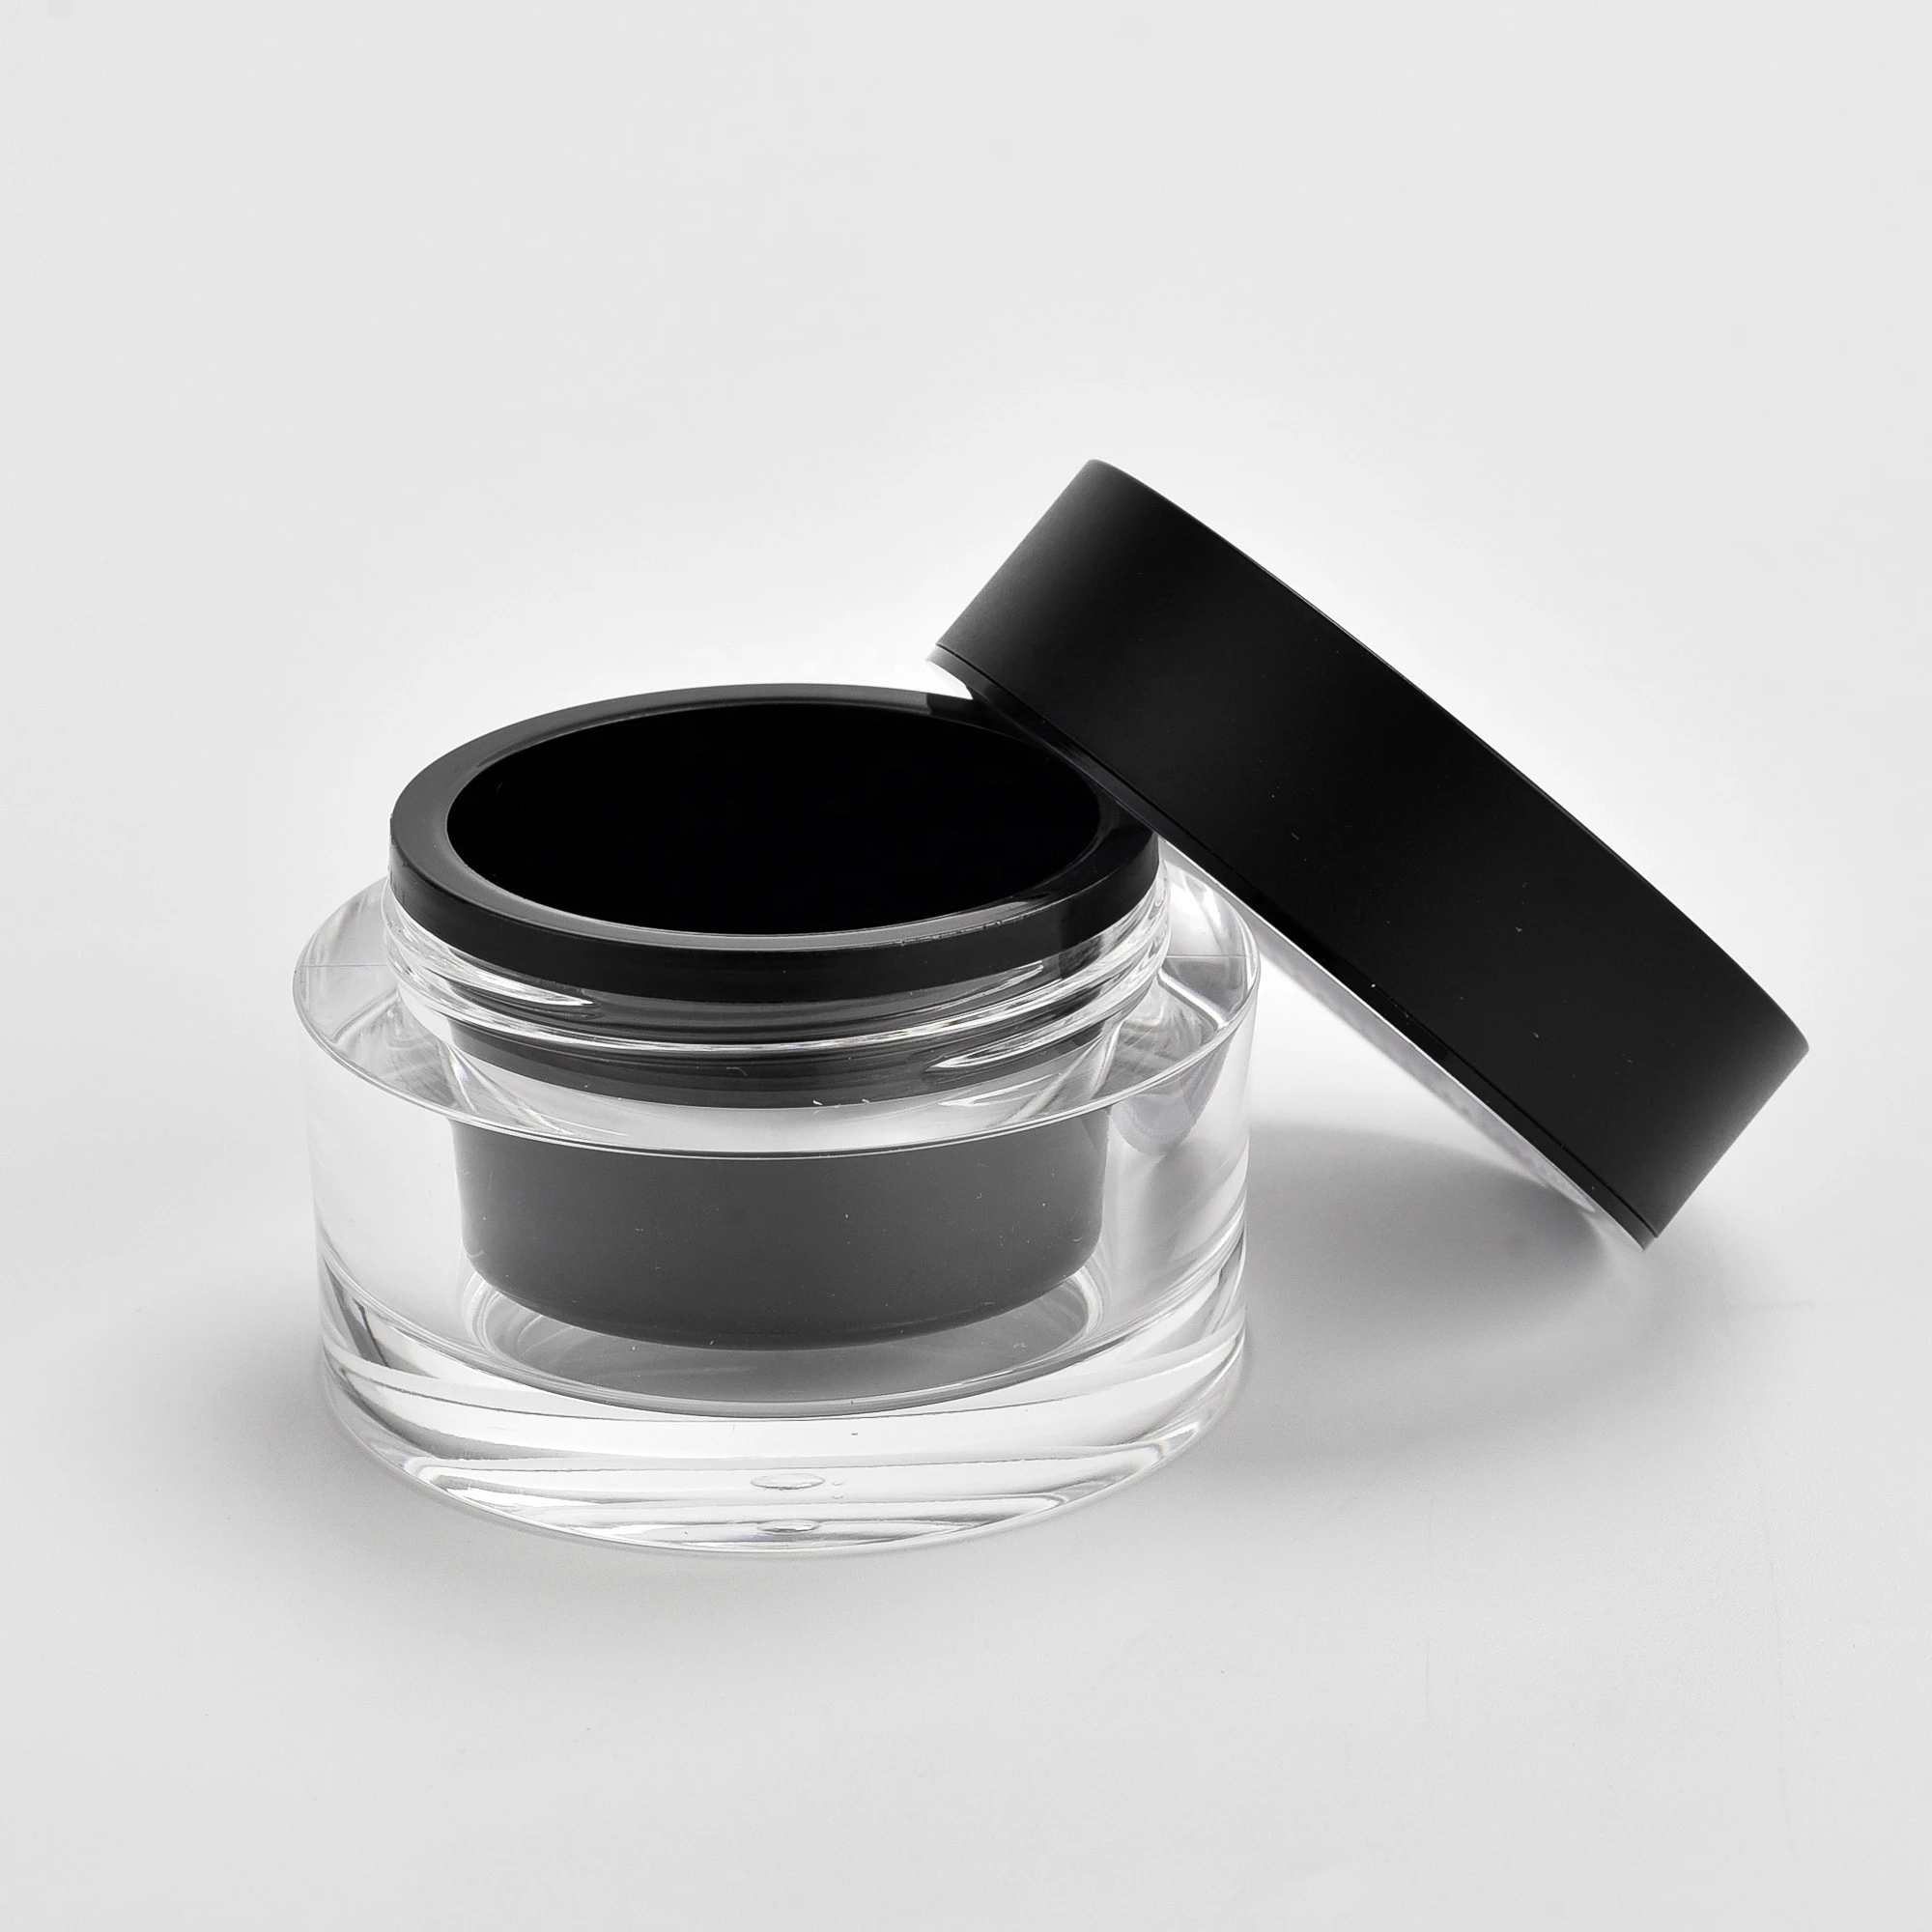 Refill Empty Bottle Cosmetic Jar Makeup Pot Balm Containers 15g in matte black